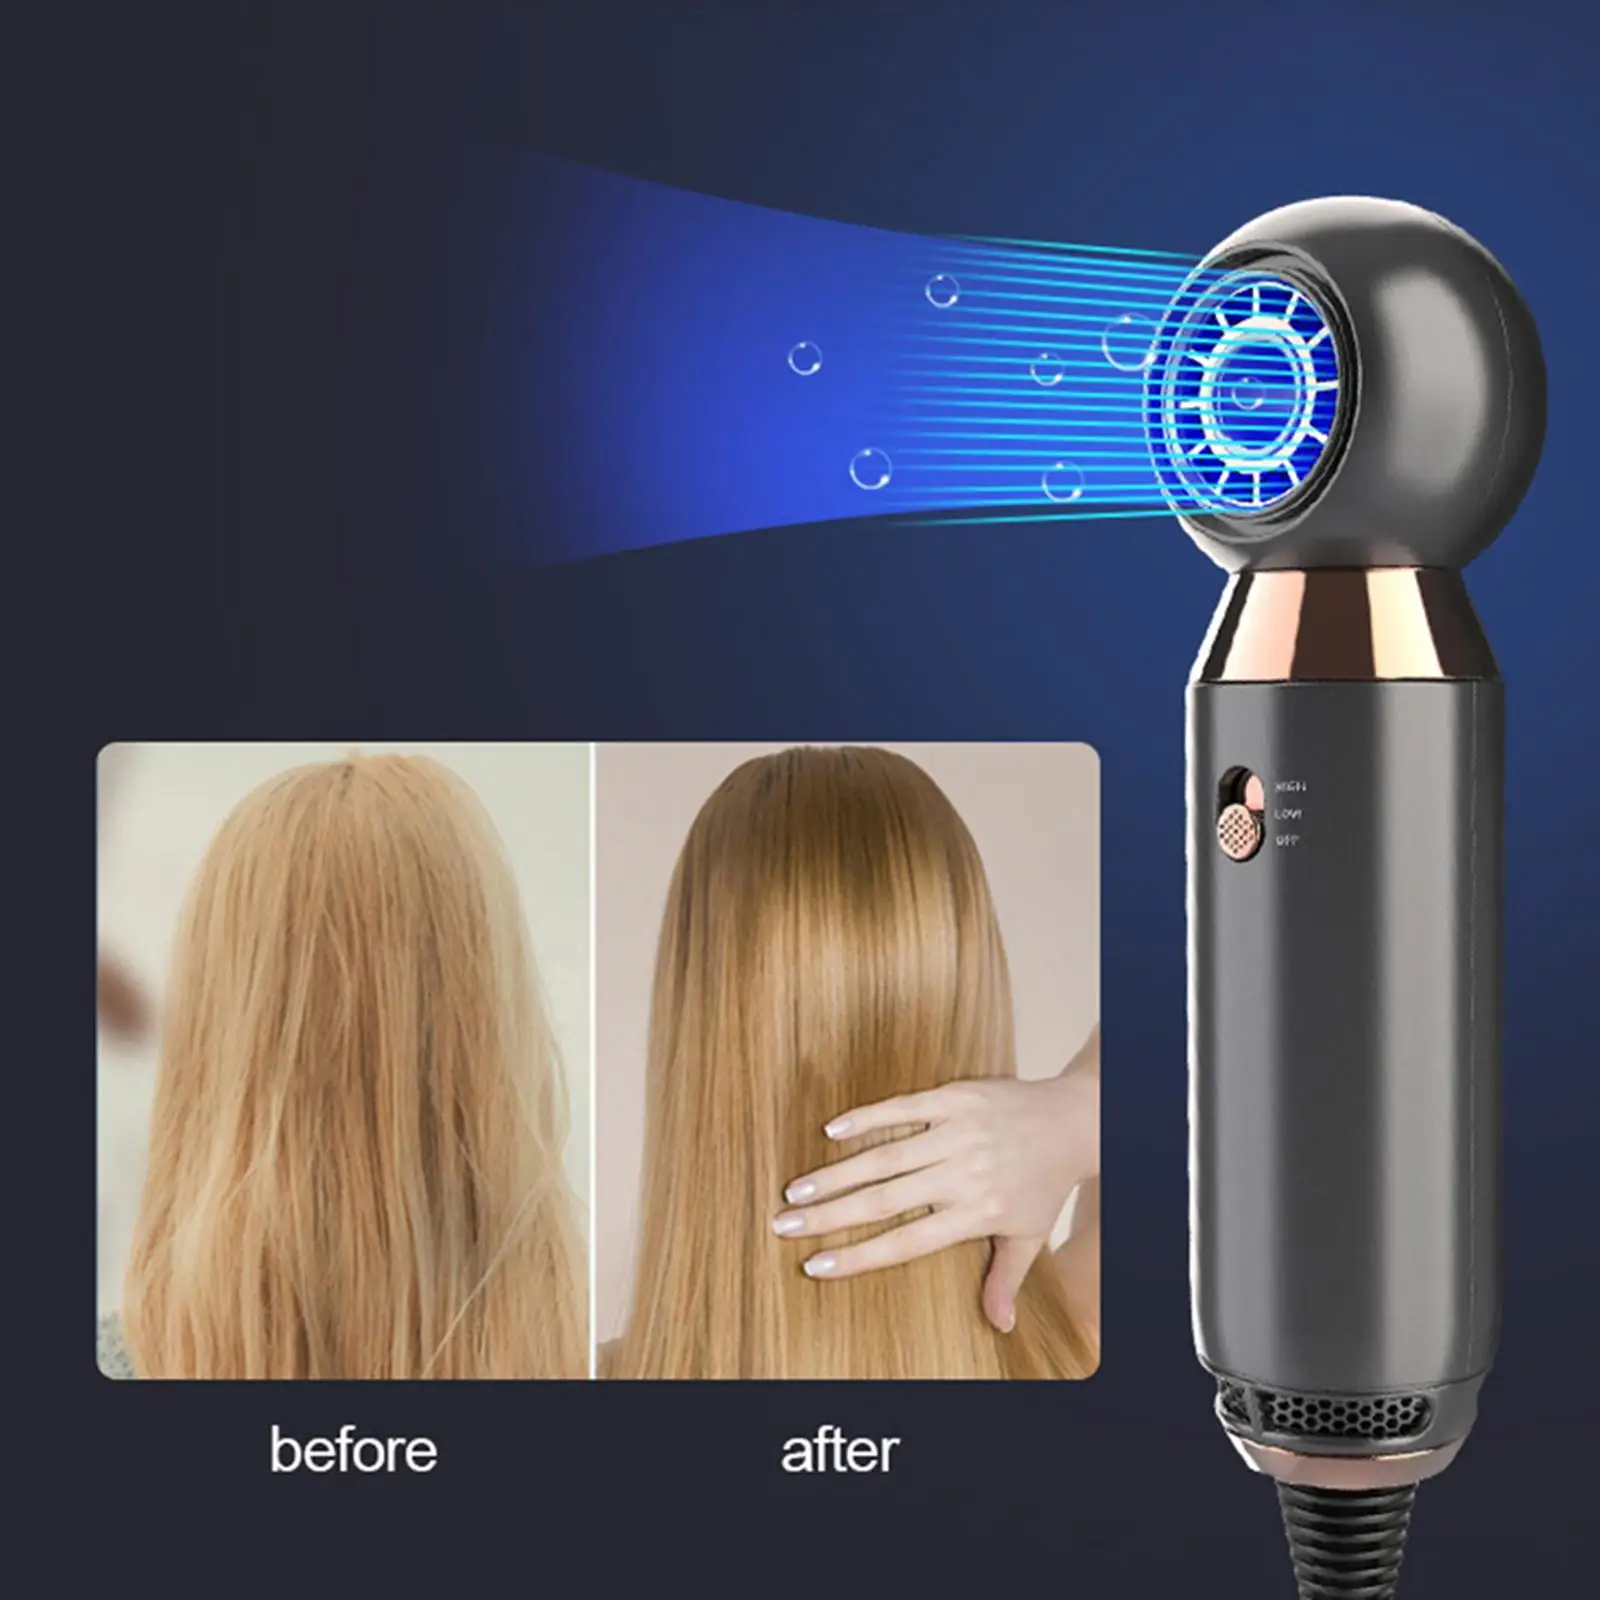 Hair Dryer Dual Ionic Technology 800W Quick Dry Blow Dryer for Personal Care Hotel